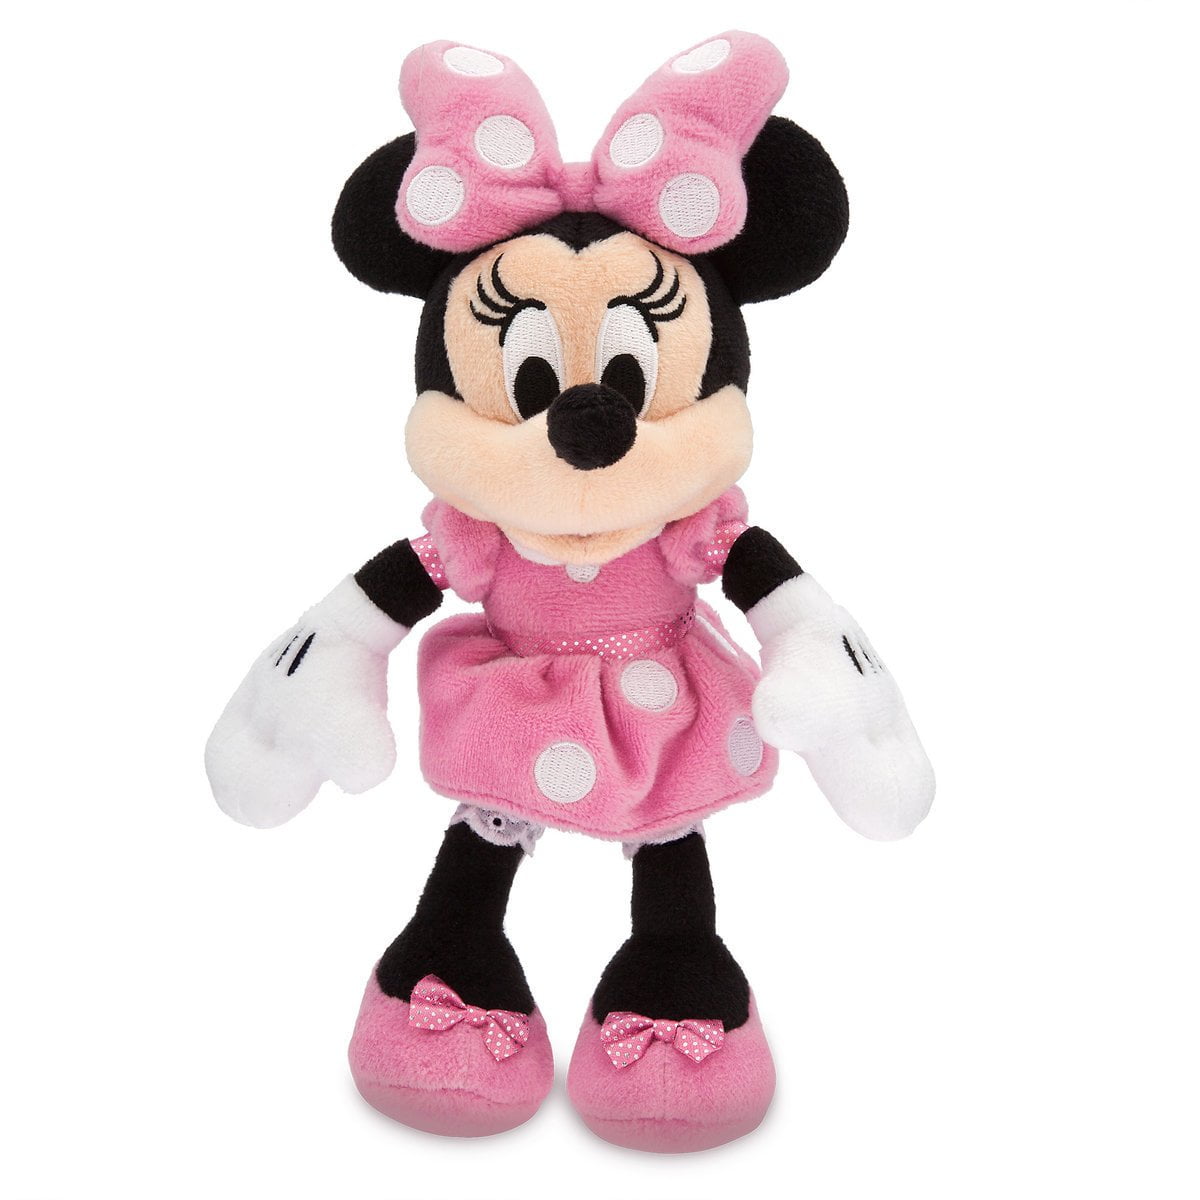 New Disney Store Clubhouse Minnie Mouse Bean Bag Plush 9" Pink Doll